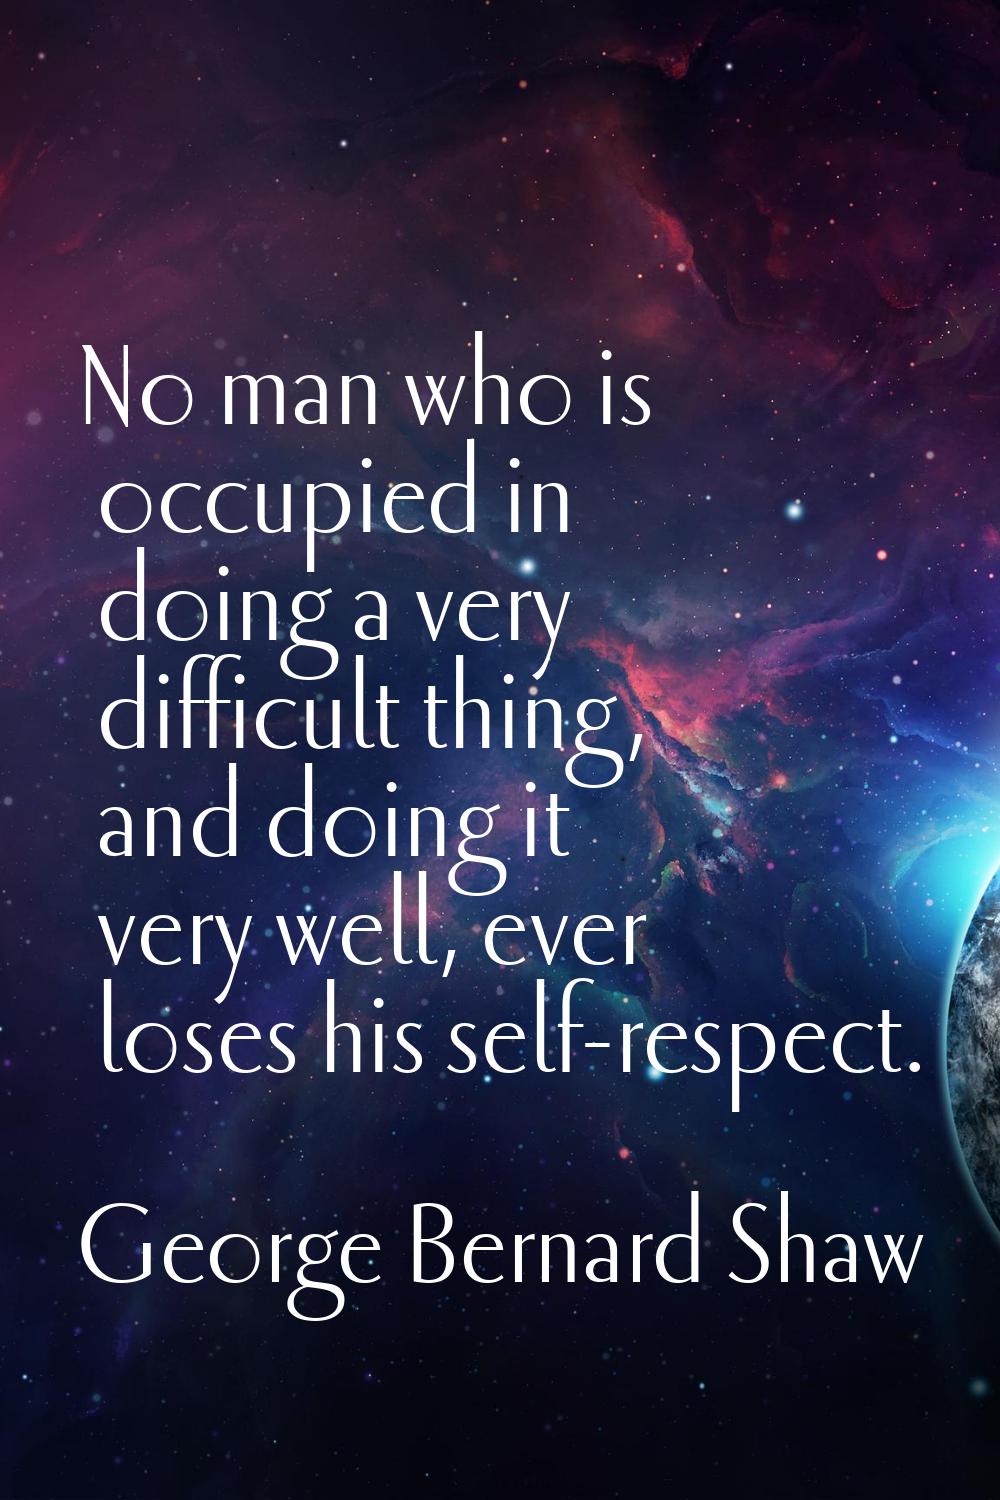 No man who is occupied in doing a very difficult thing, and doing it very well, ever loses his self